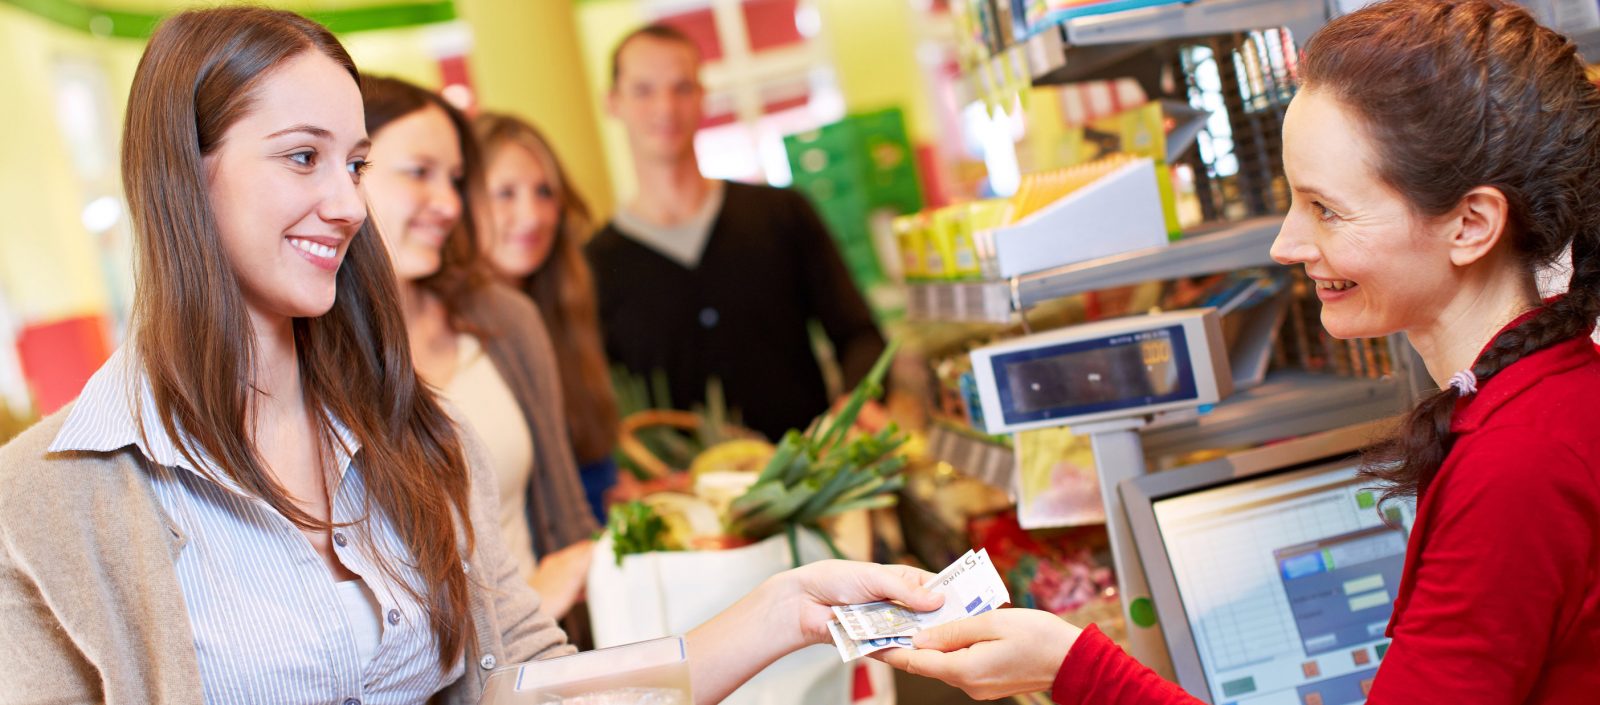 Learn how to be an effective grocery store manager and schedule your employees successfully.